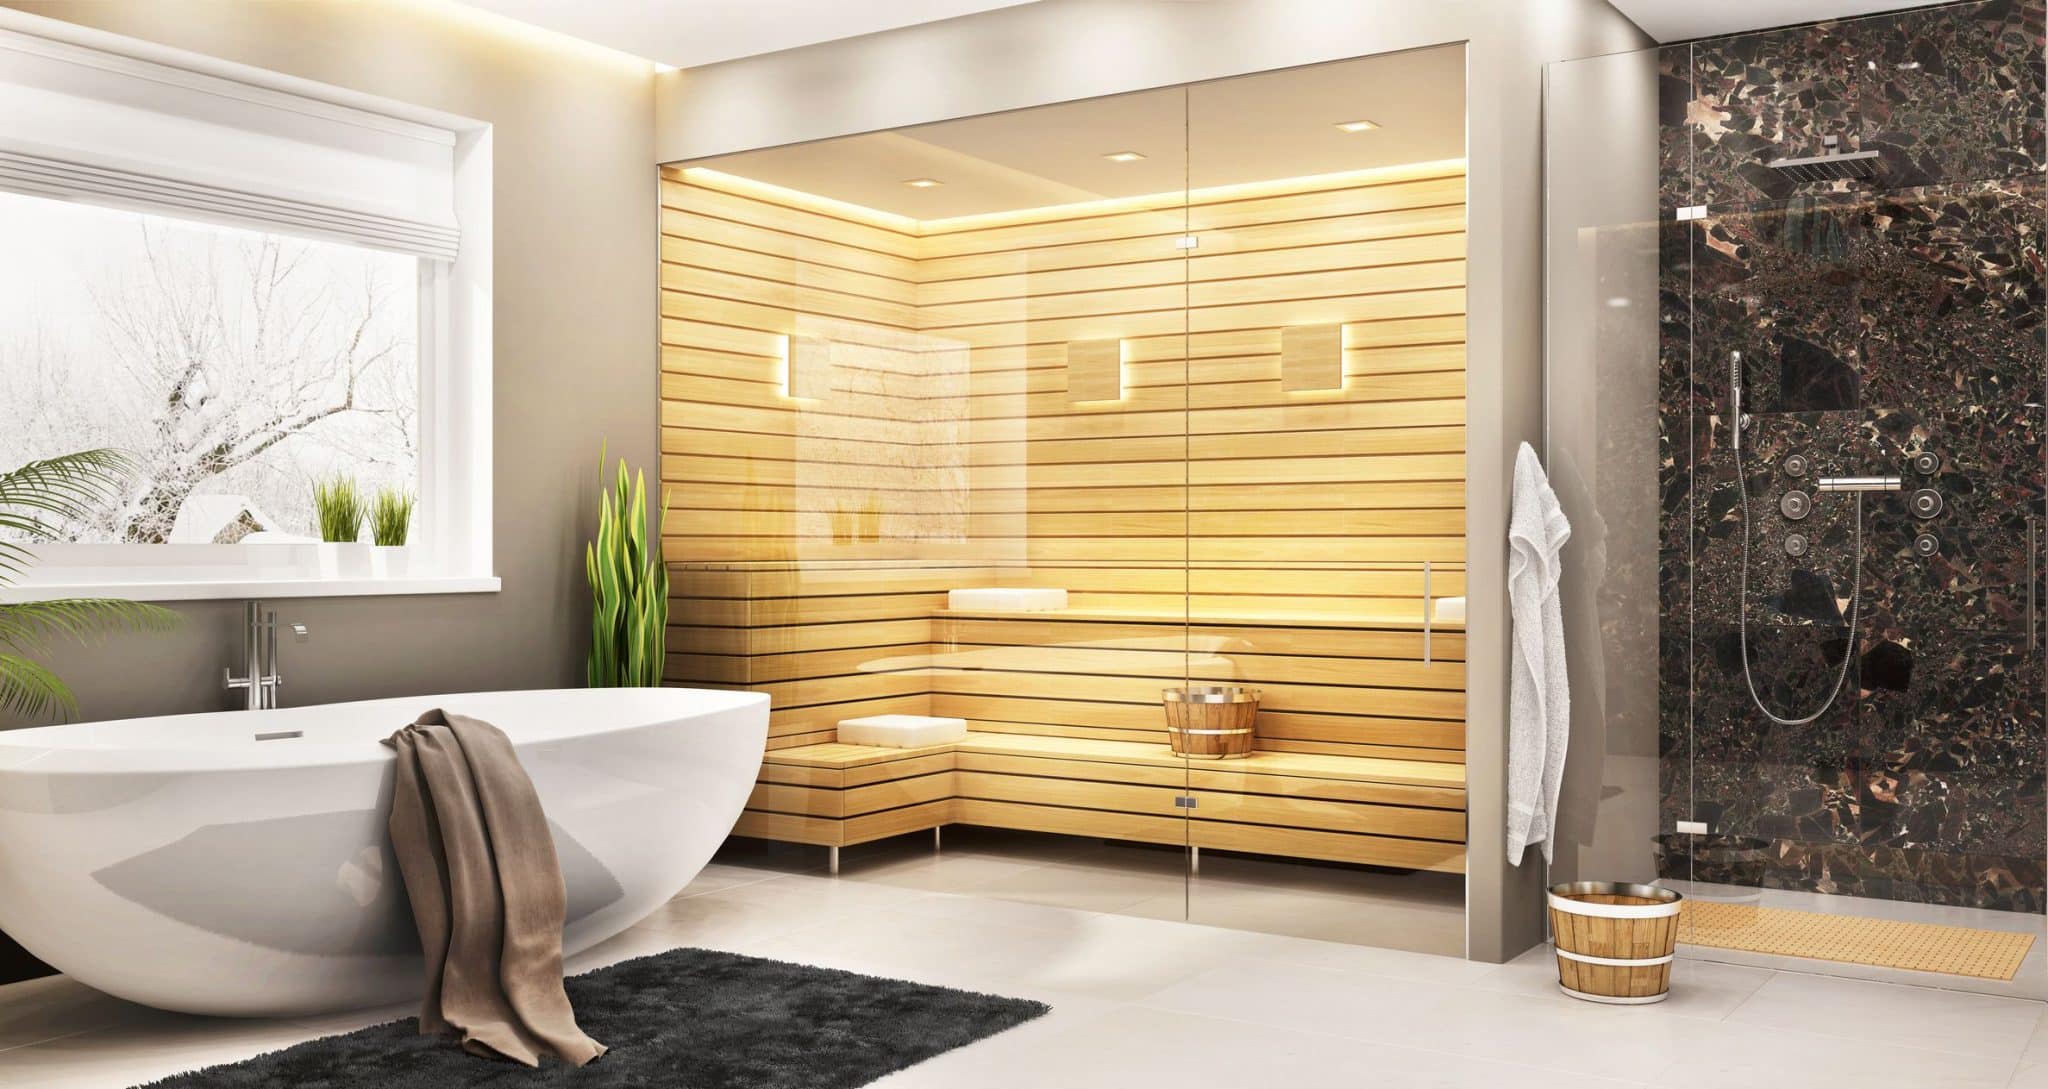 A Step-by-step Guide To Convert Your Shower Into A Steam Room